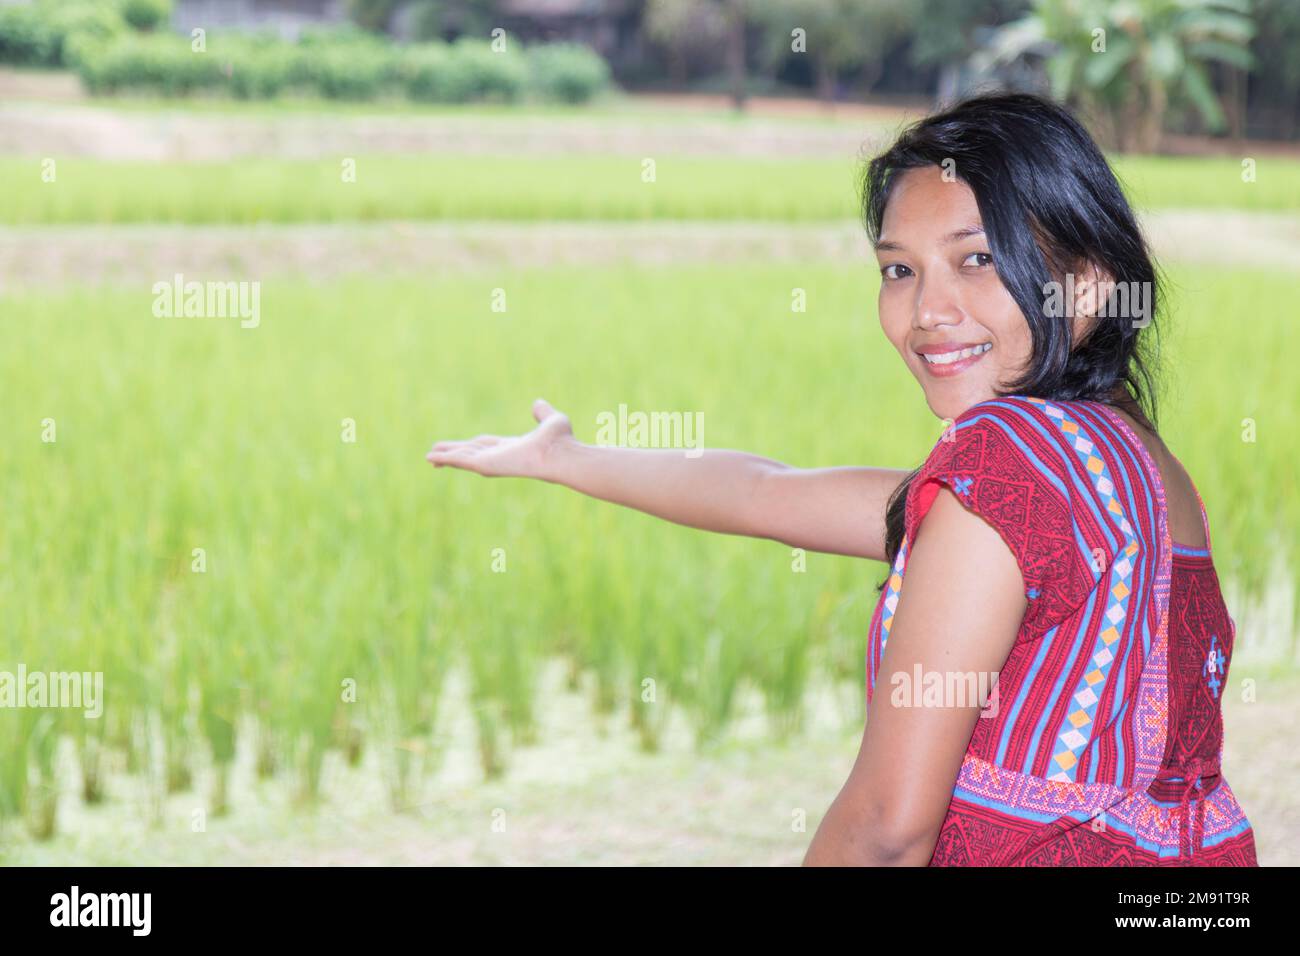 A young woman in a traditional costume points to a rice field Stock Photo